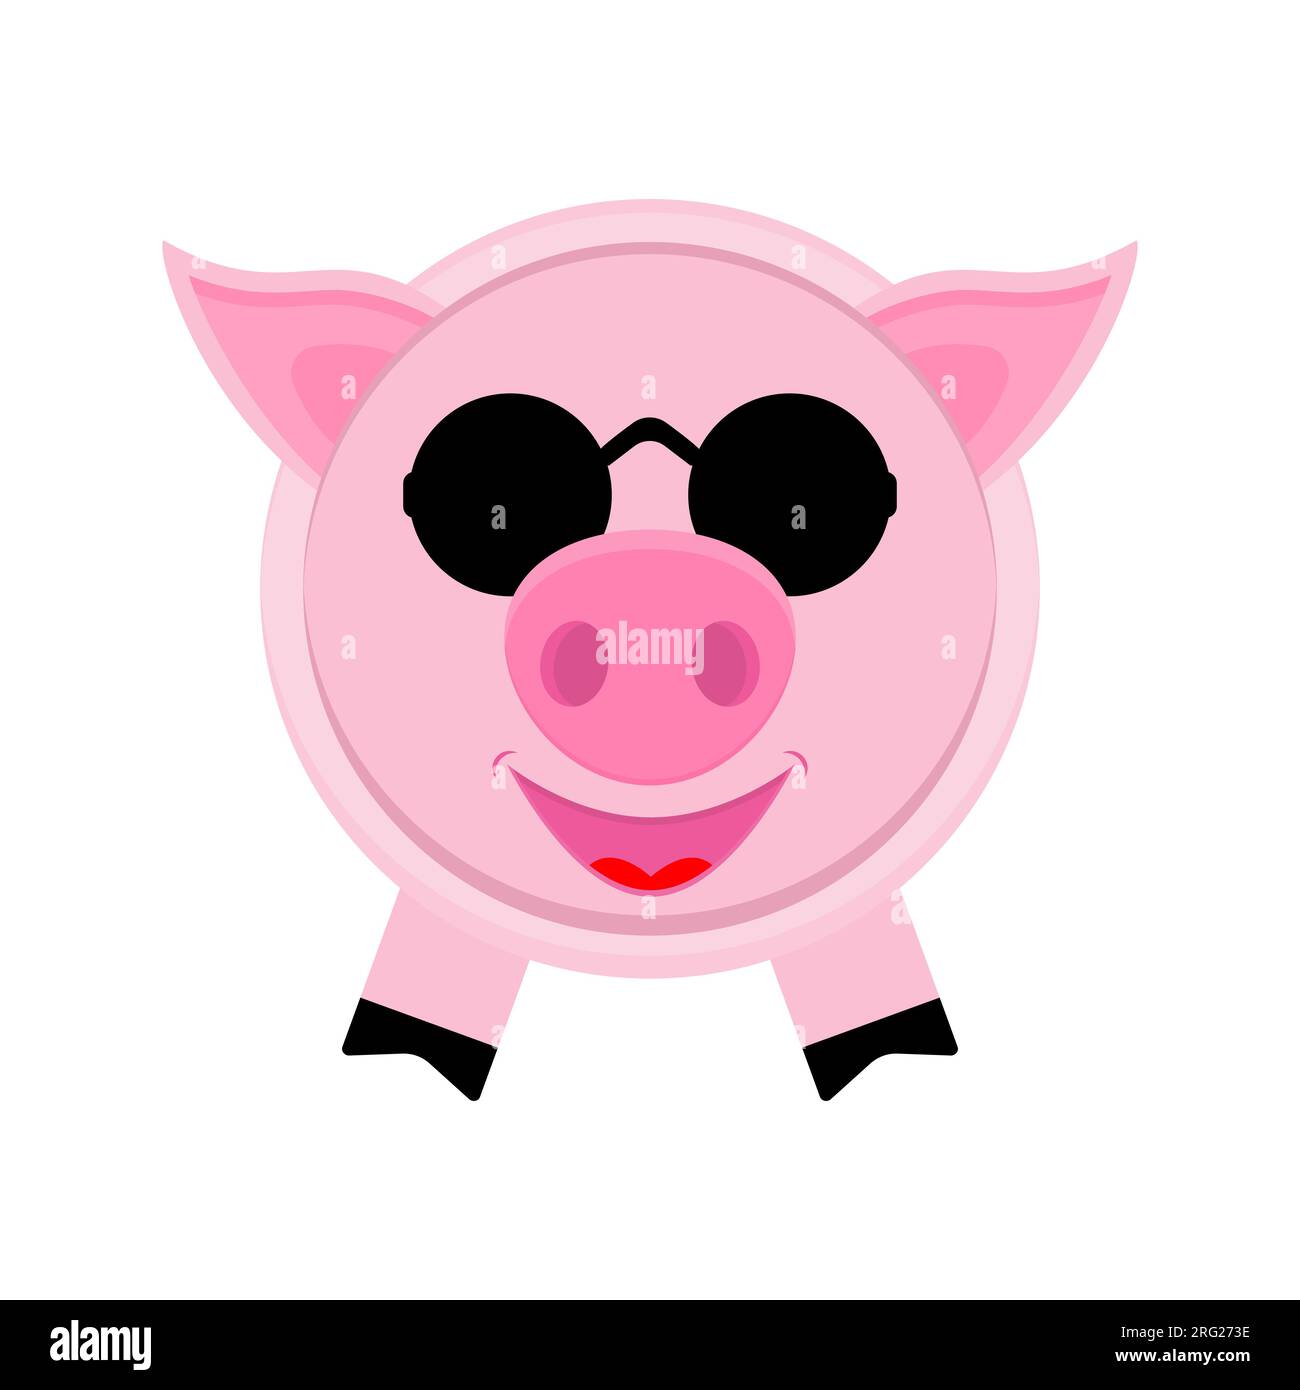 social work clipart black and white pig